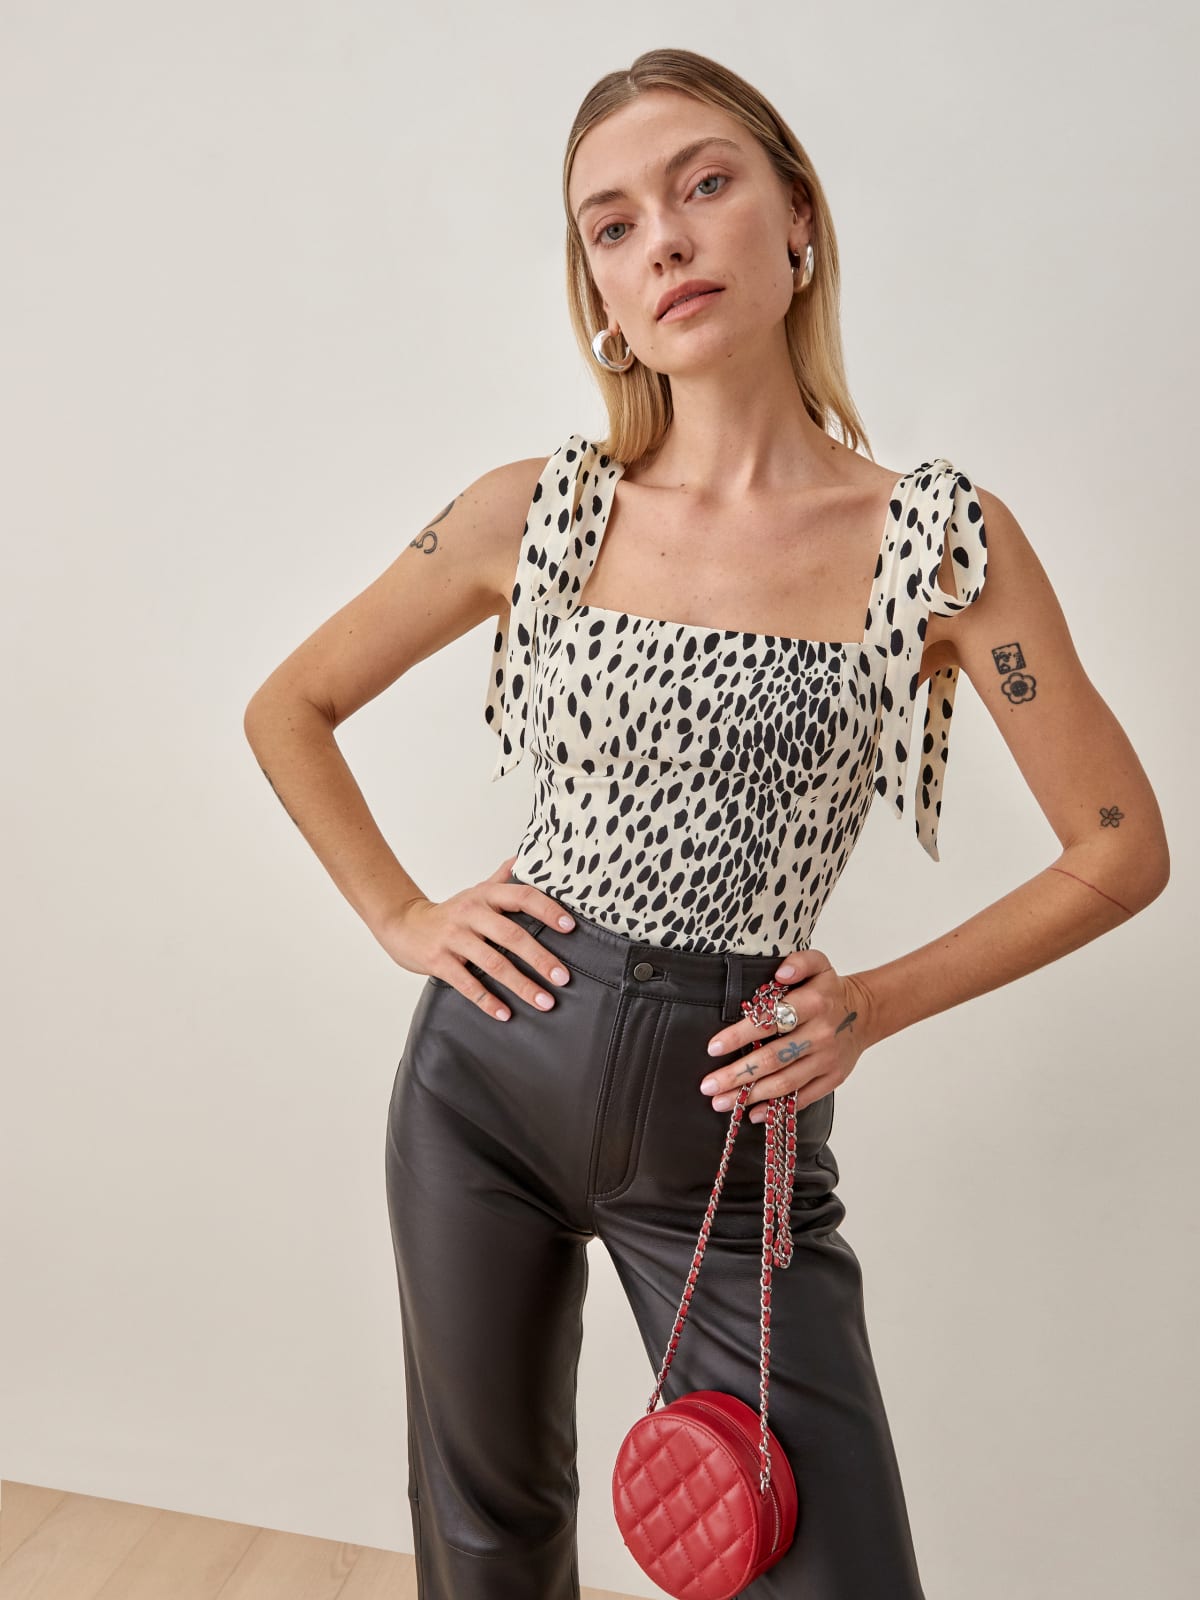 Reformation Ellora Cheetah print top. This top has a Center back zipper with a Fitted bodice and Hip length silhouette.It has a Smocked back bodice and Straight neckline with tie straps. 